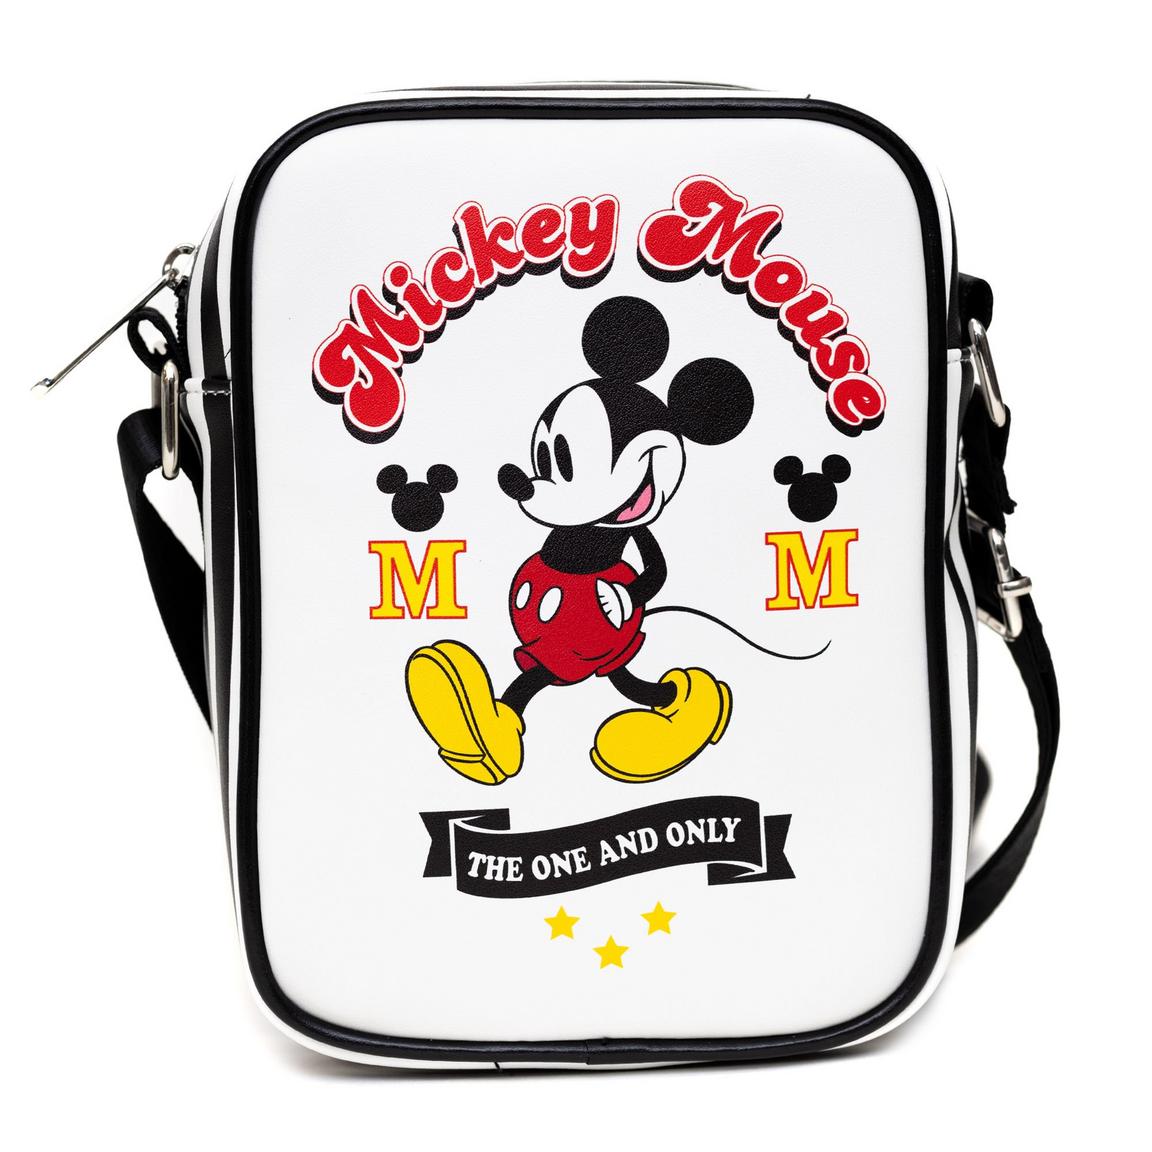 Buckle-Down Disney Mickey Mouse - Mickey Walking Polyurethane Crossbody Bag with Piping Edge and Cell Phone Pocket, Size: One Size, Buckle Down